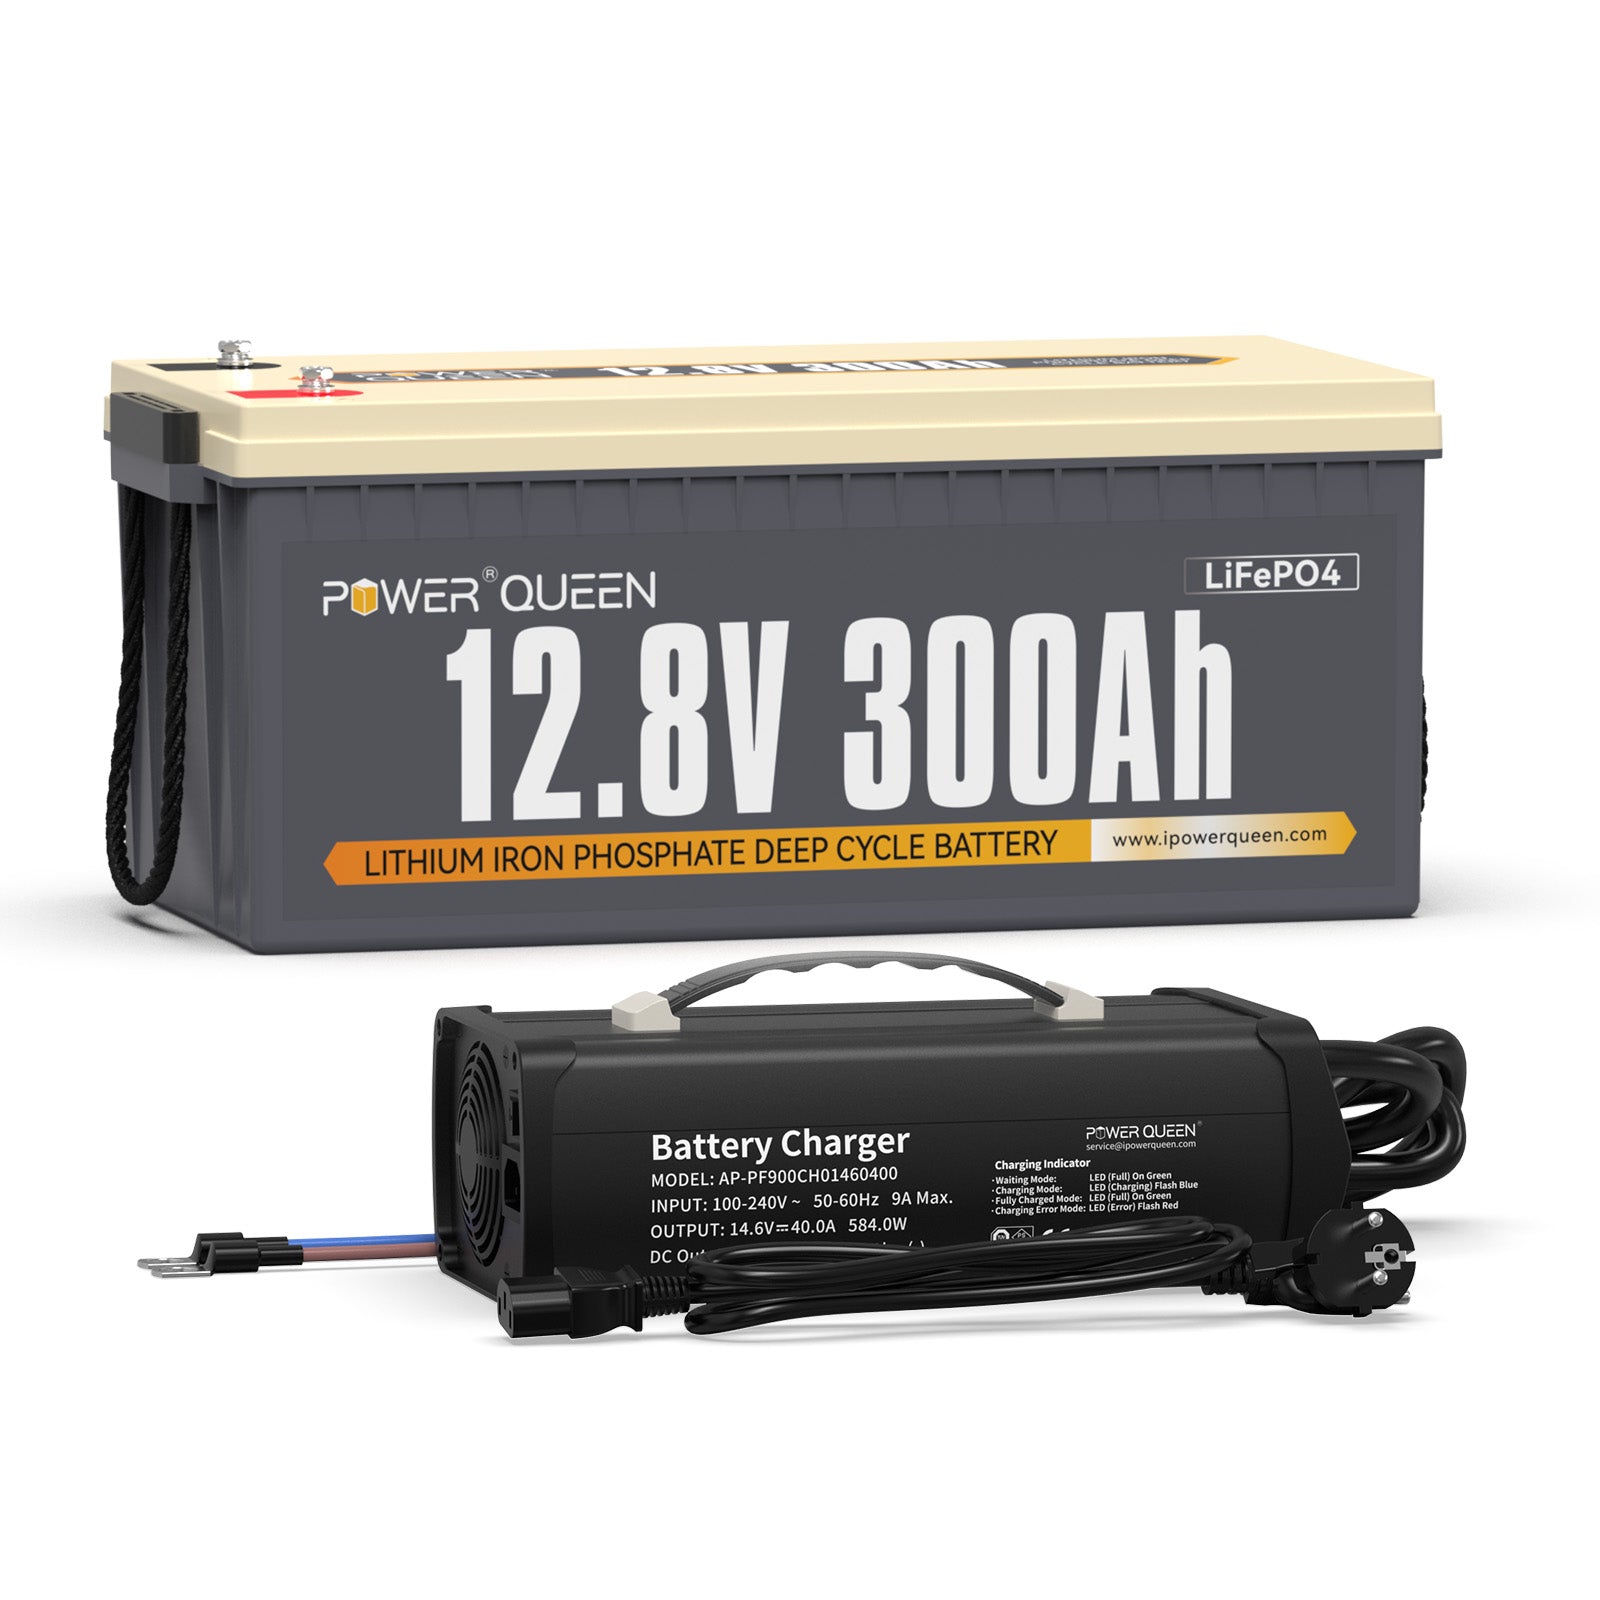 Power Queen 12V 300Ah LiFePO4 battery, integrated 200A BMS